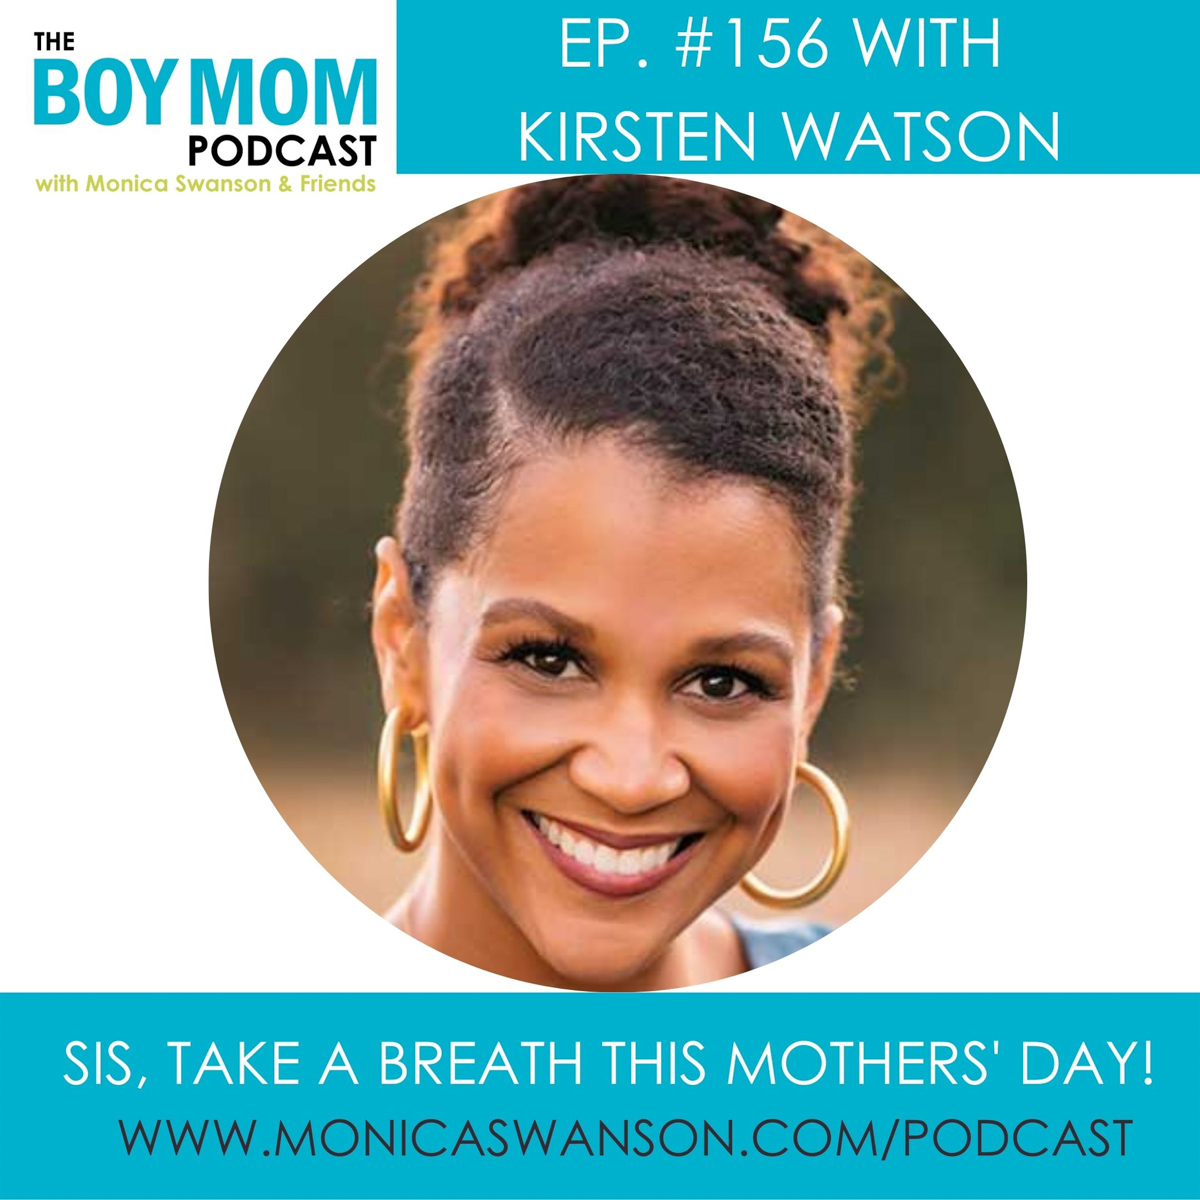 Take a Breath this Mothers’ Day {Episode-156 with Kirsten Watson}